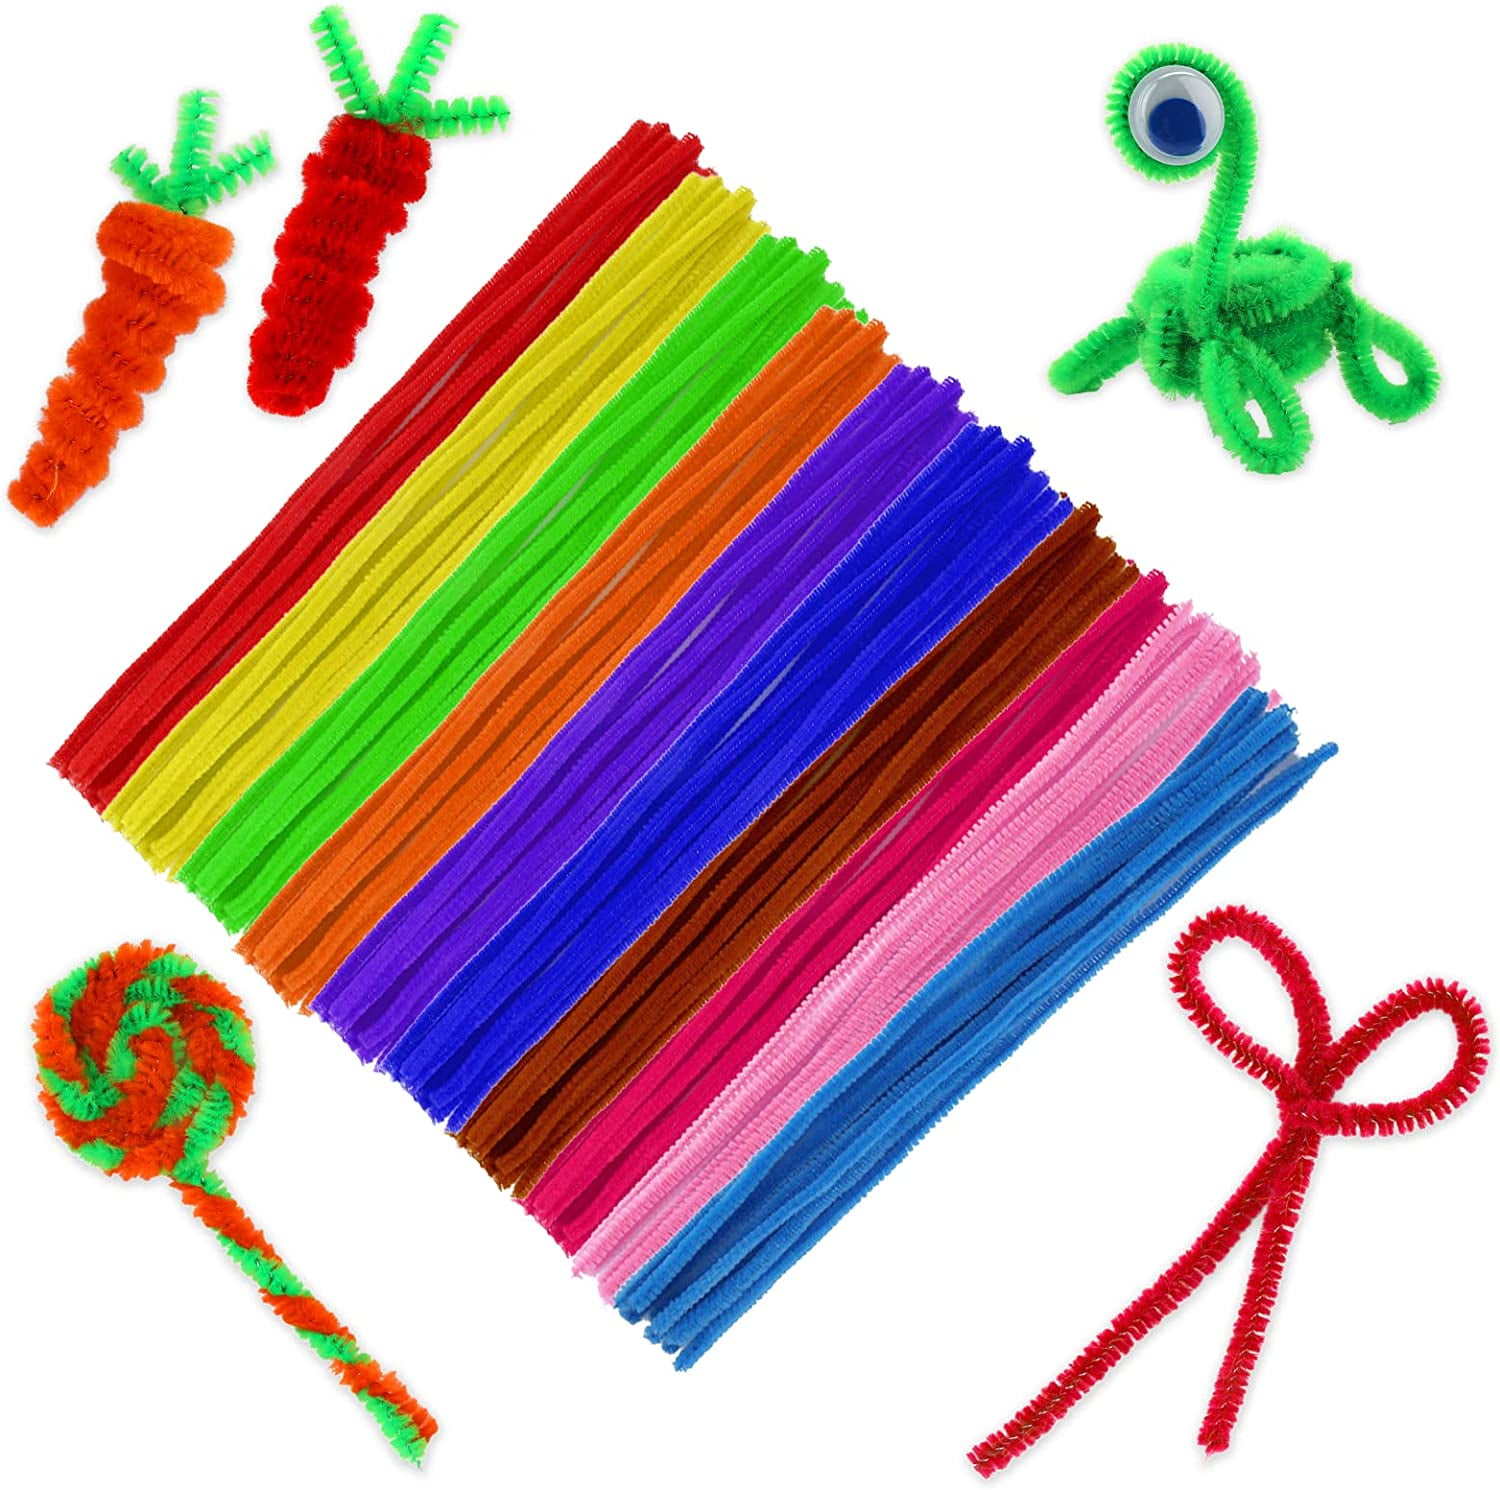 EXTRIC Pipe Cleaners- 100pc. Pipe Cleaner Yellow Pipe Cleaners-Chenille Stems, Pipe Cleaners Craft, Fuzzy Sticks Great Craft Supplies DIY Art & Craft